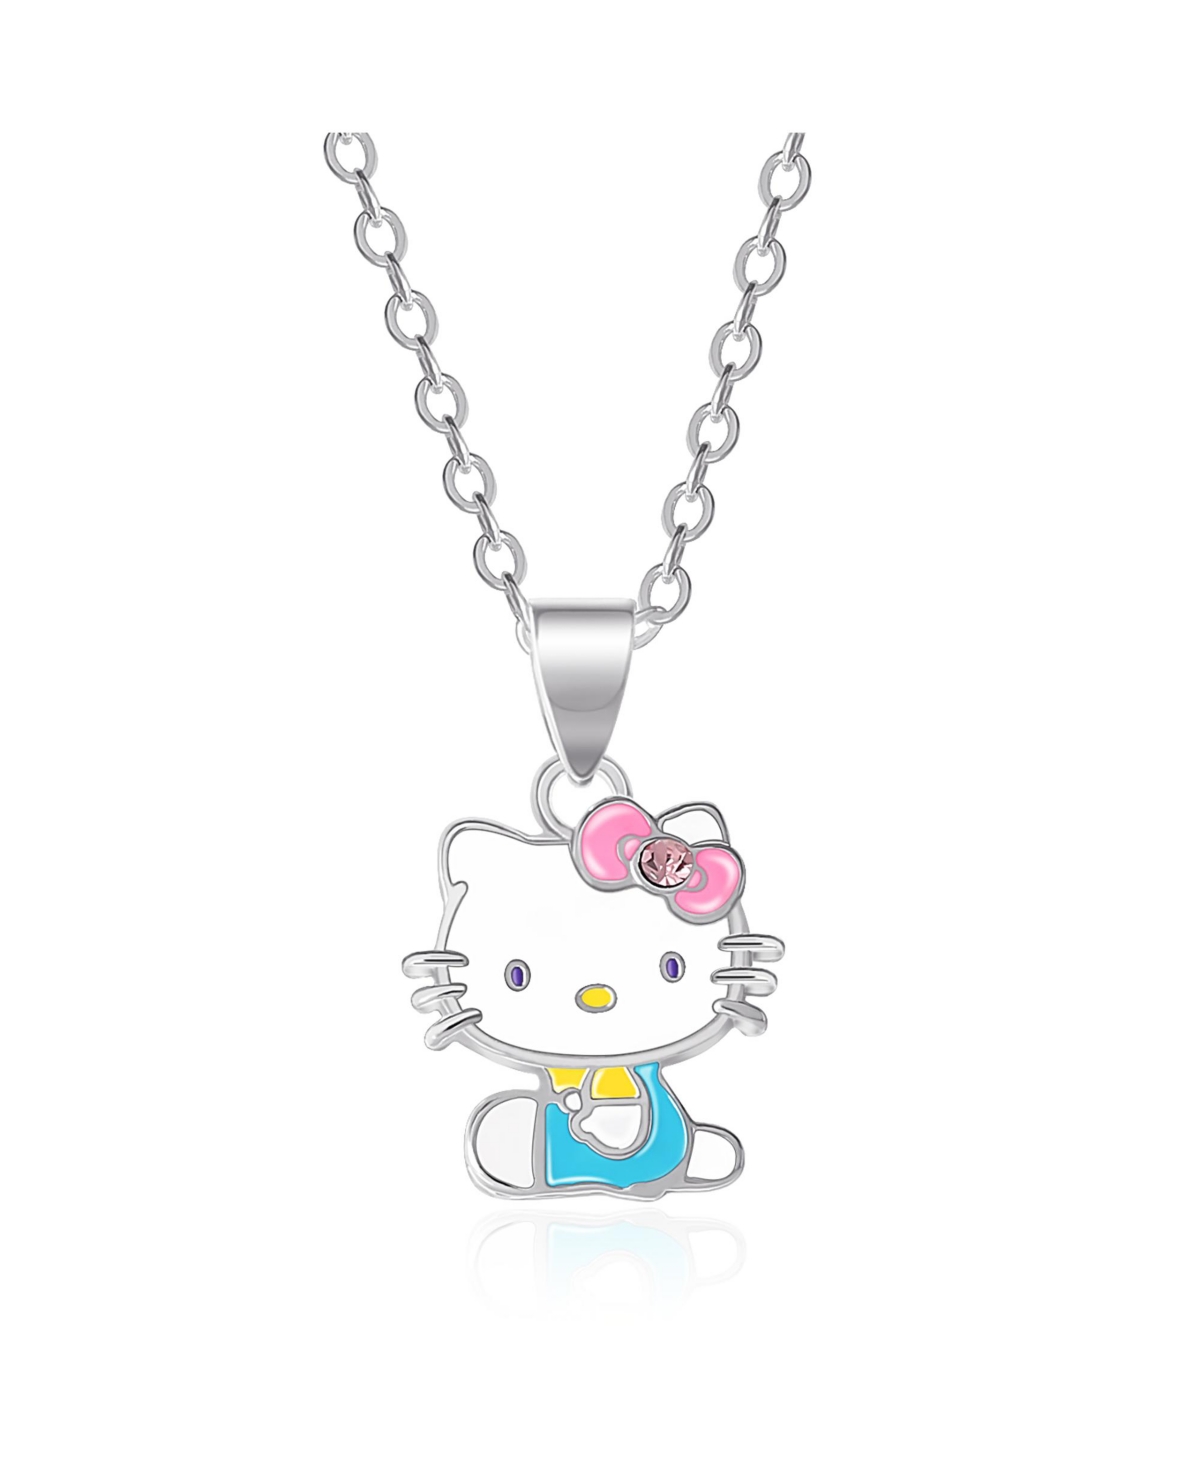 Hello Kitty Sanrio Silver Plated and Clear Crystal My Melody Pendant - 18'' Chain, Officially Licensed Authentic - Pink